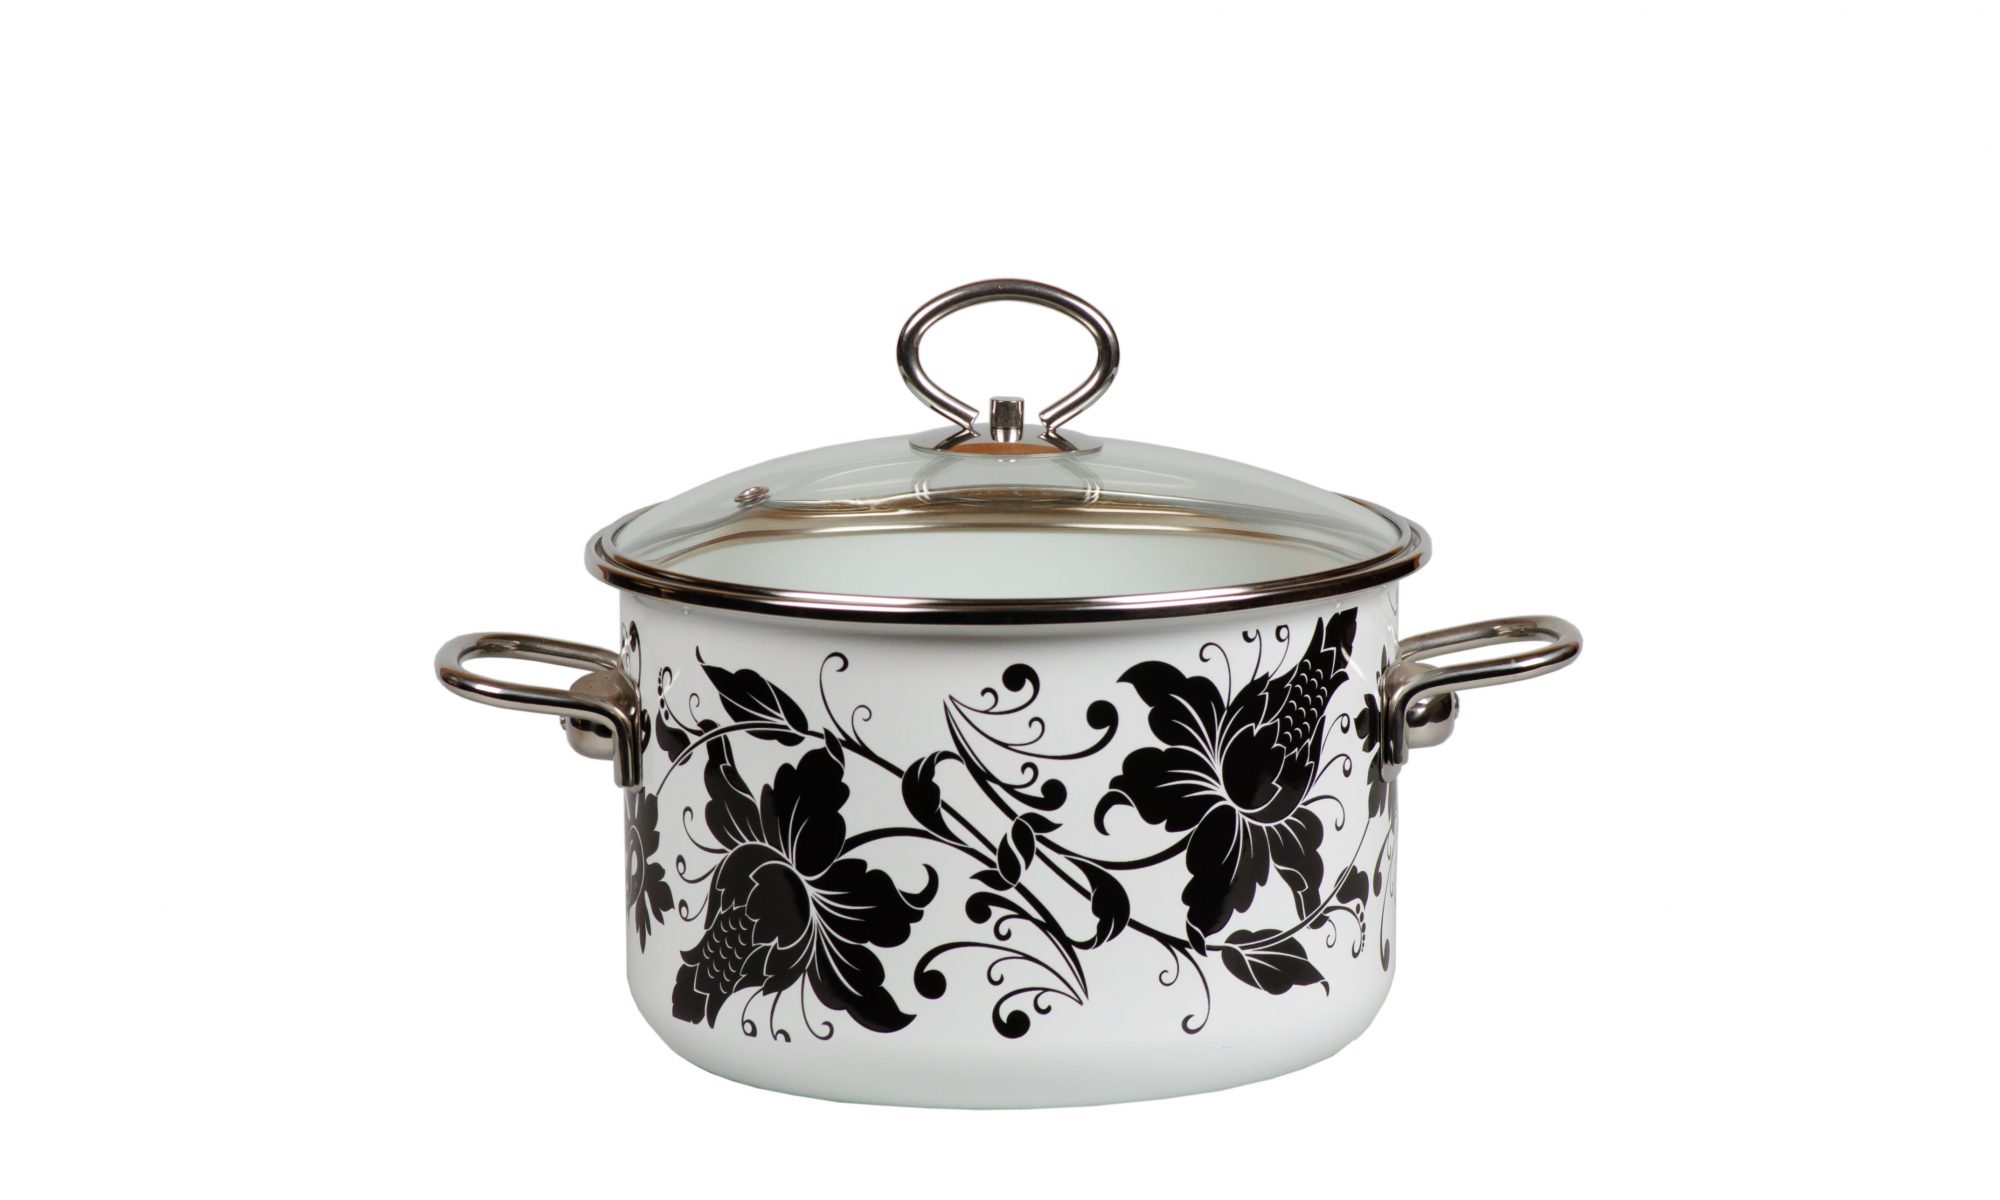 3L. "Tango" Steel Enameled pot. Suitable for electric